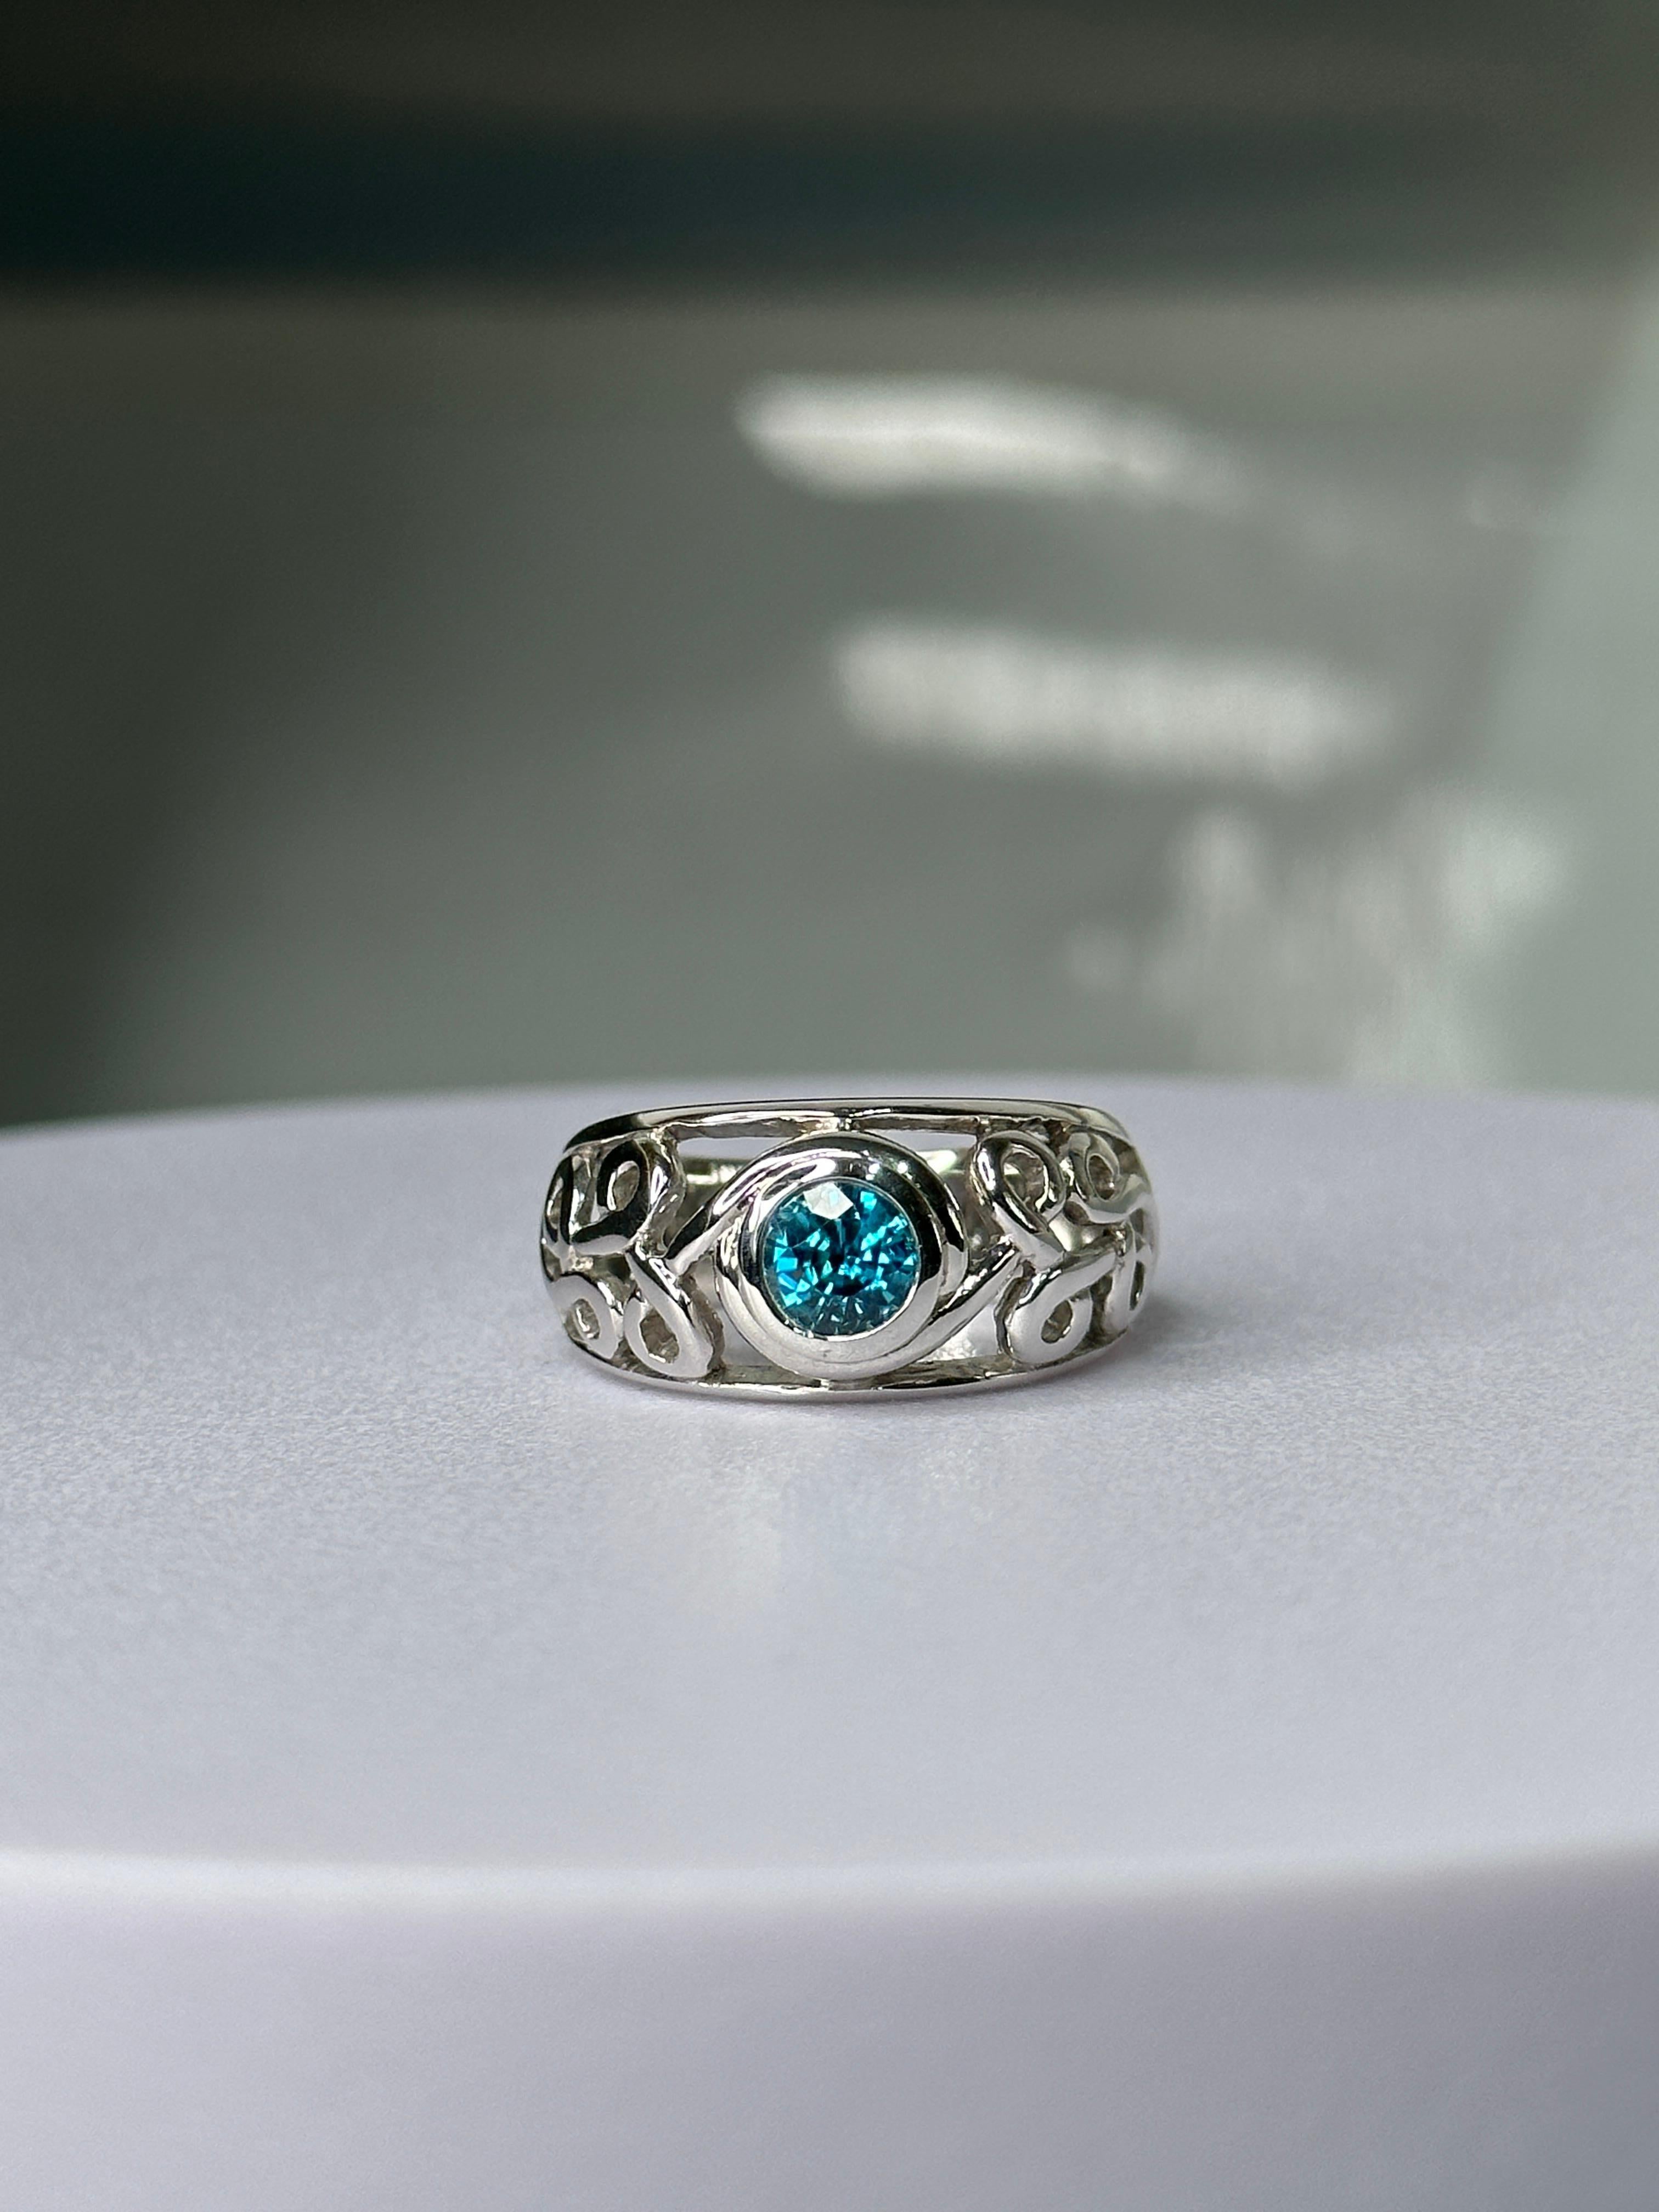 Contemporary Orloff of Denmark, 1.15 ct Ocean Blue Zircon Ring in 925 Sterling Silver For Sale